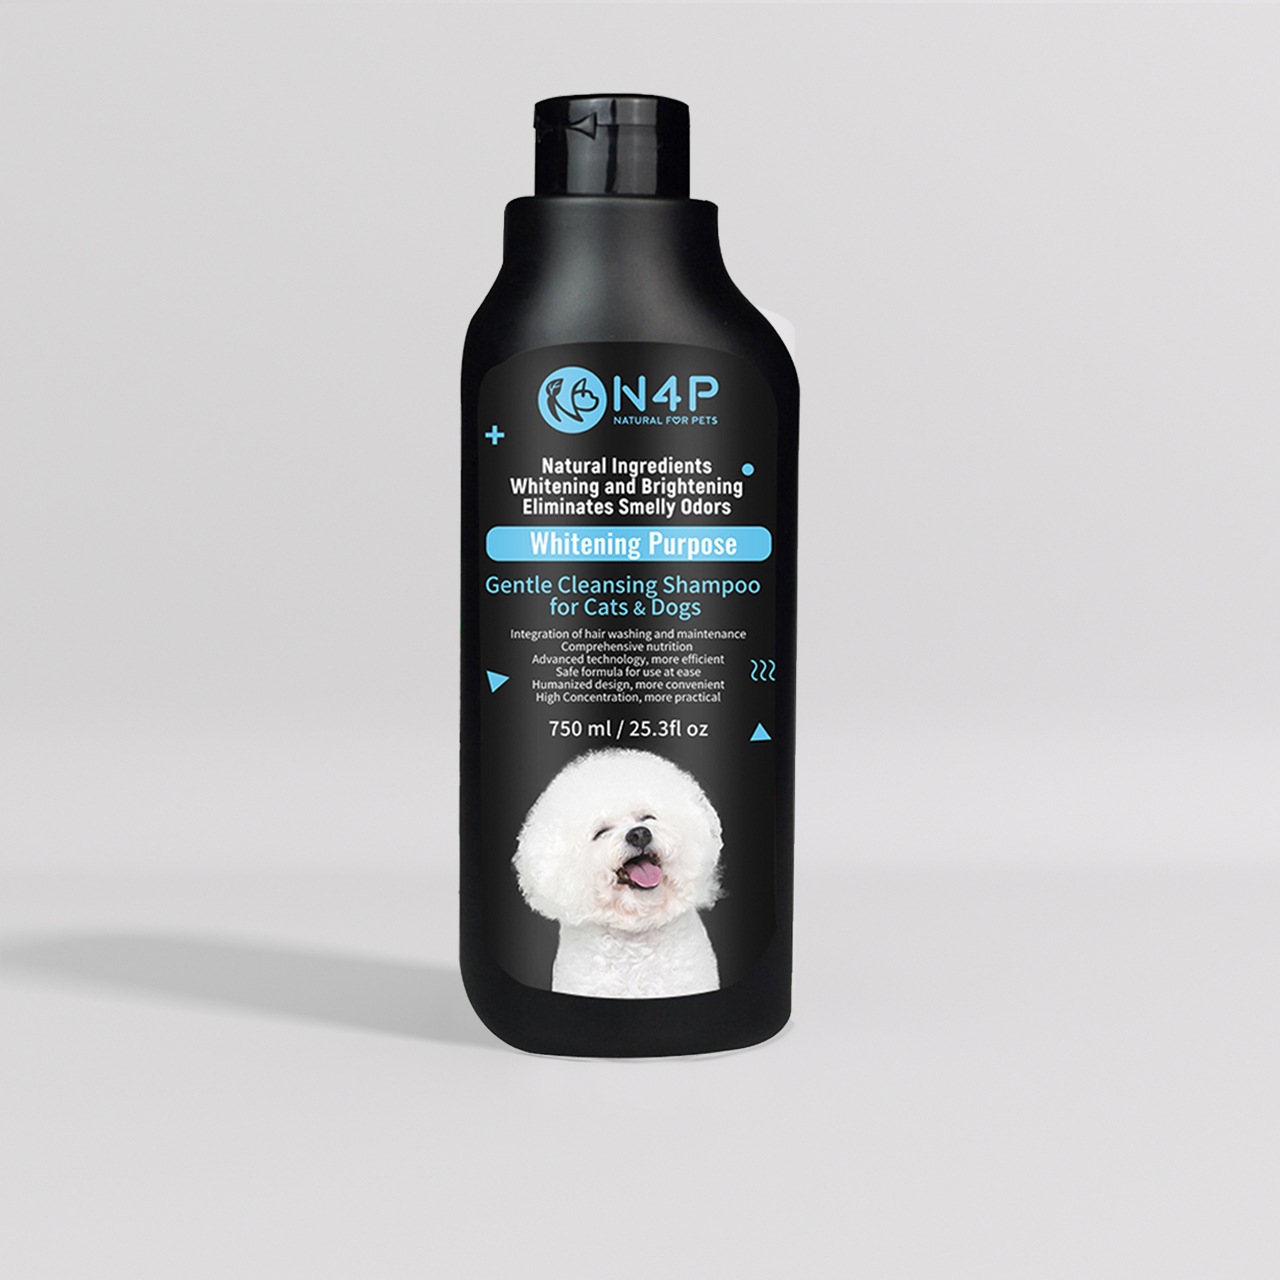 Pets Shampoo Whitening Purpose 750ml for Cats & Dogs